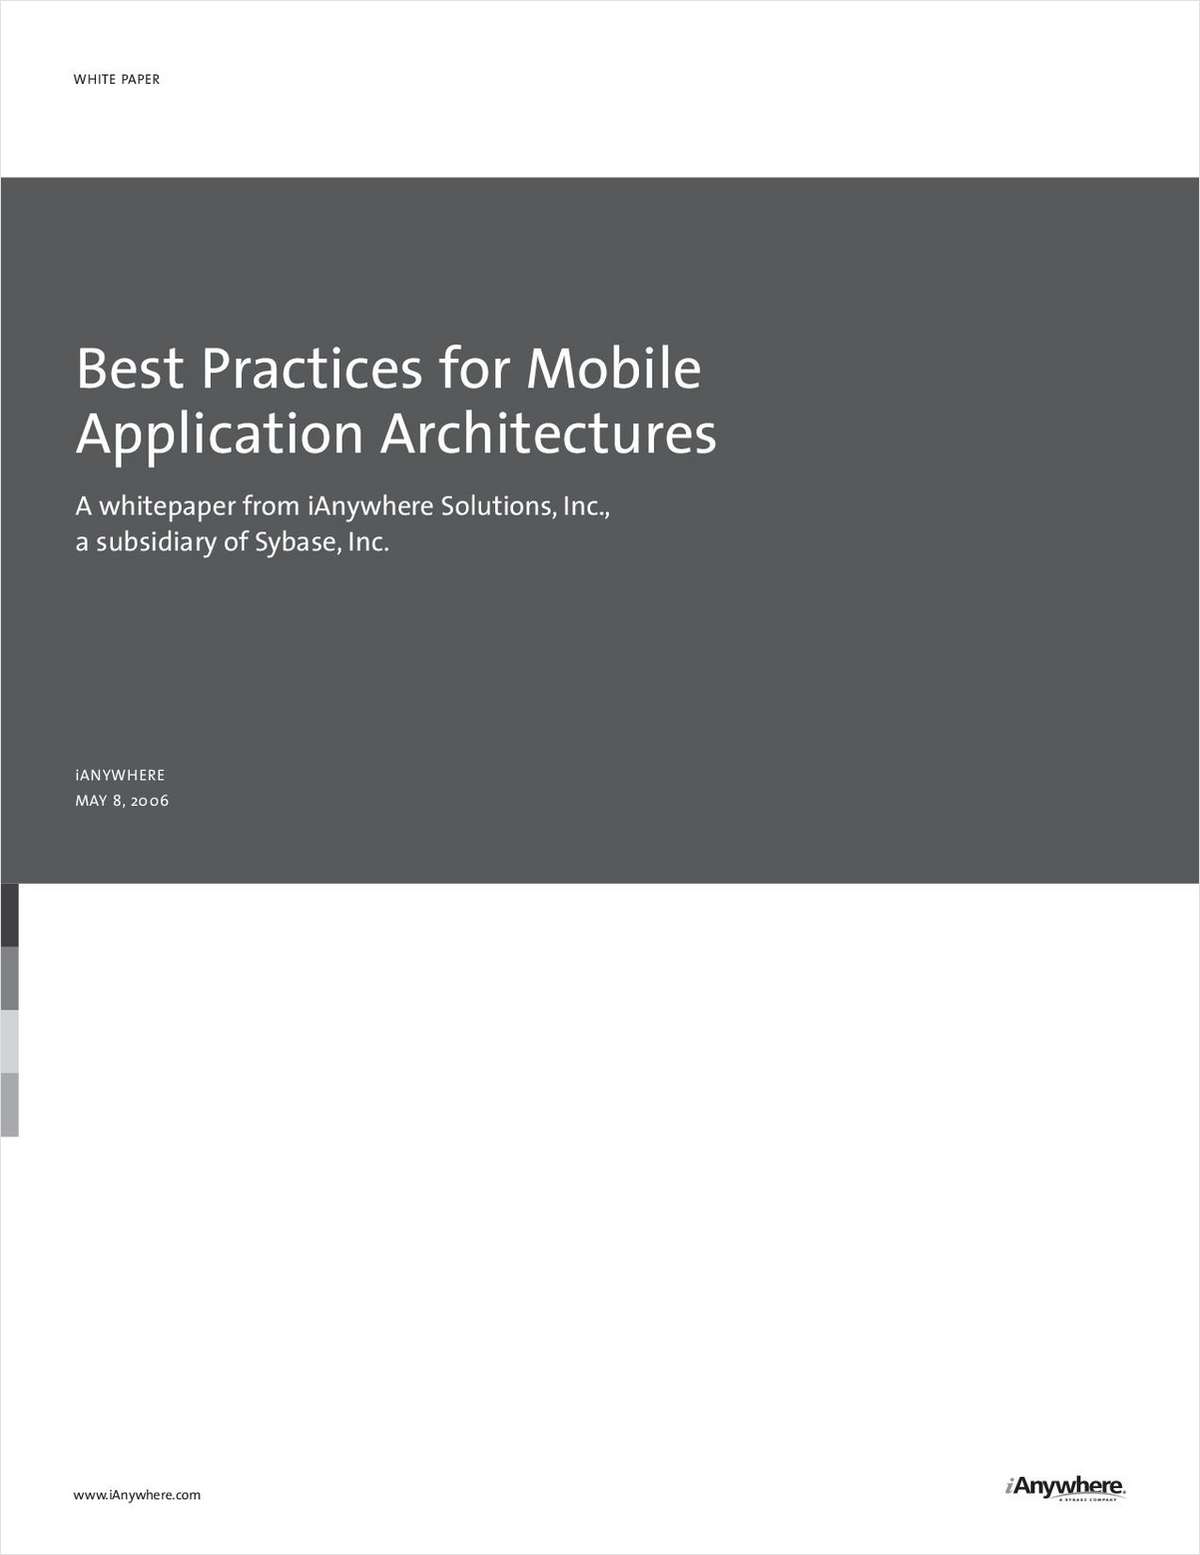 Best Practices for Mobile Application Architectures